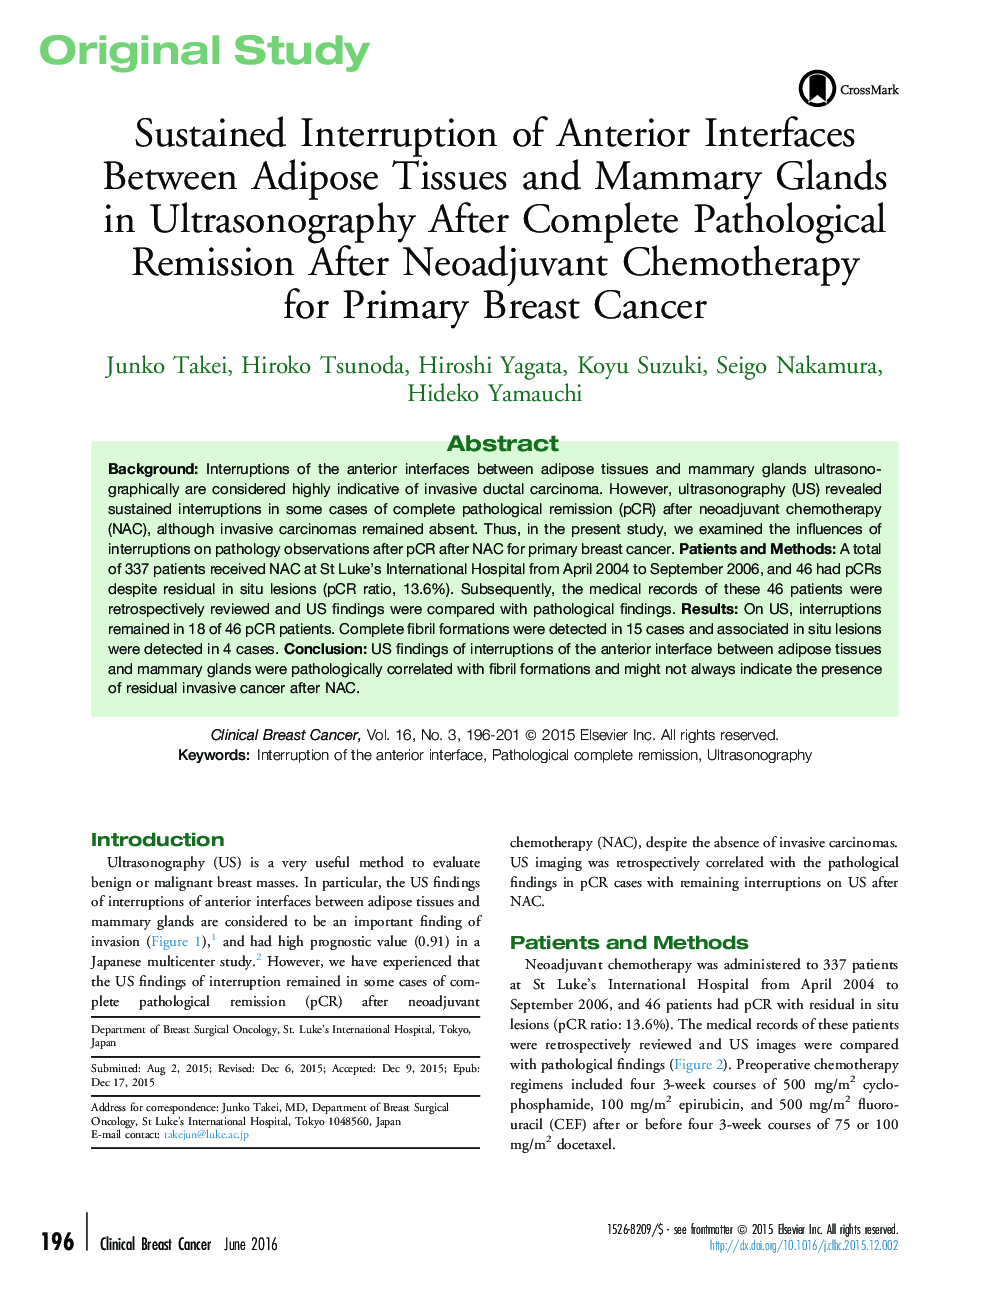 Sustained Interruption of Anterior Interfaces Between Adipose Tissues and Mammary Glands in Ultrasonography After Complete Pathological Remission After Neoadjuvant Chemotherapy for Primary Breast Cancer